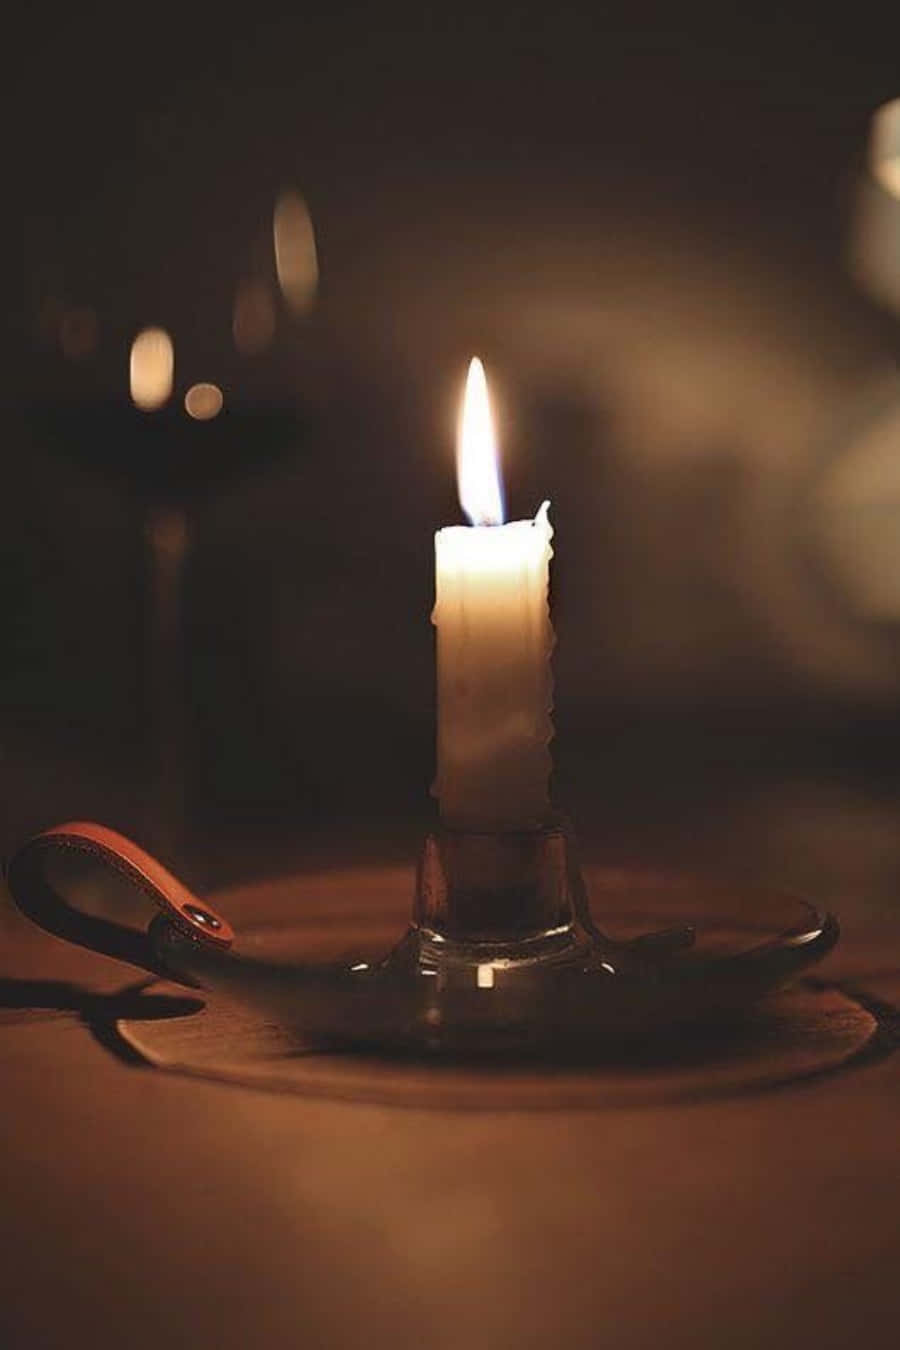 A Candle Is Lit On A Table